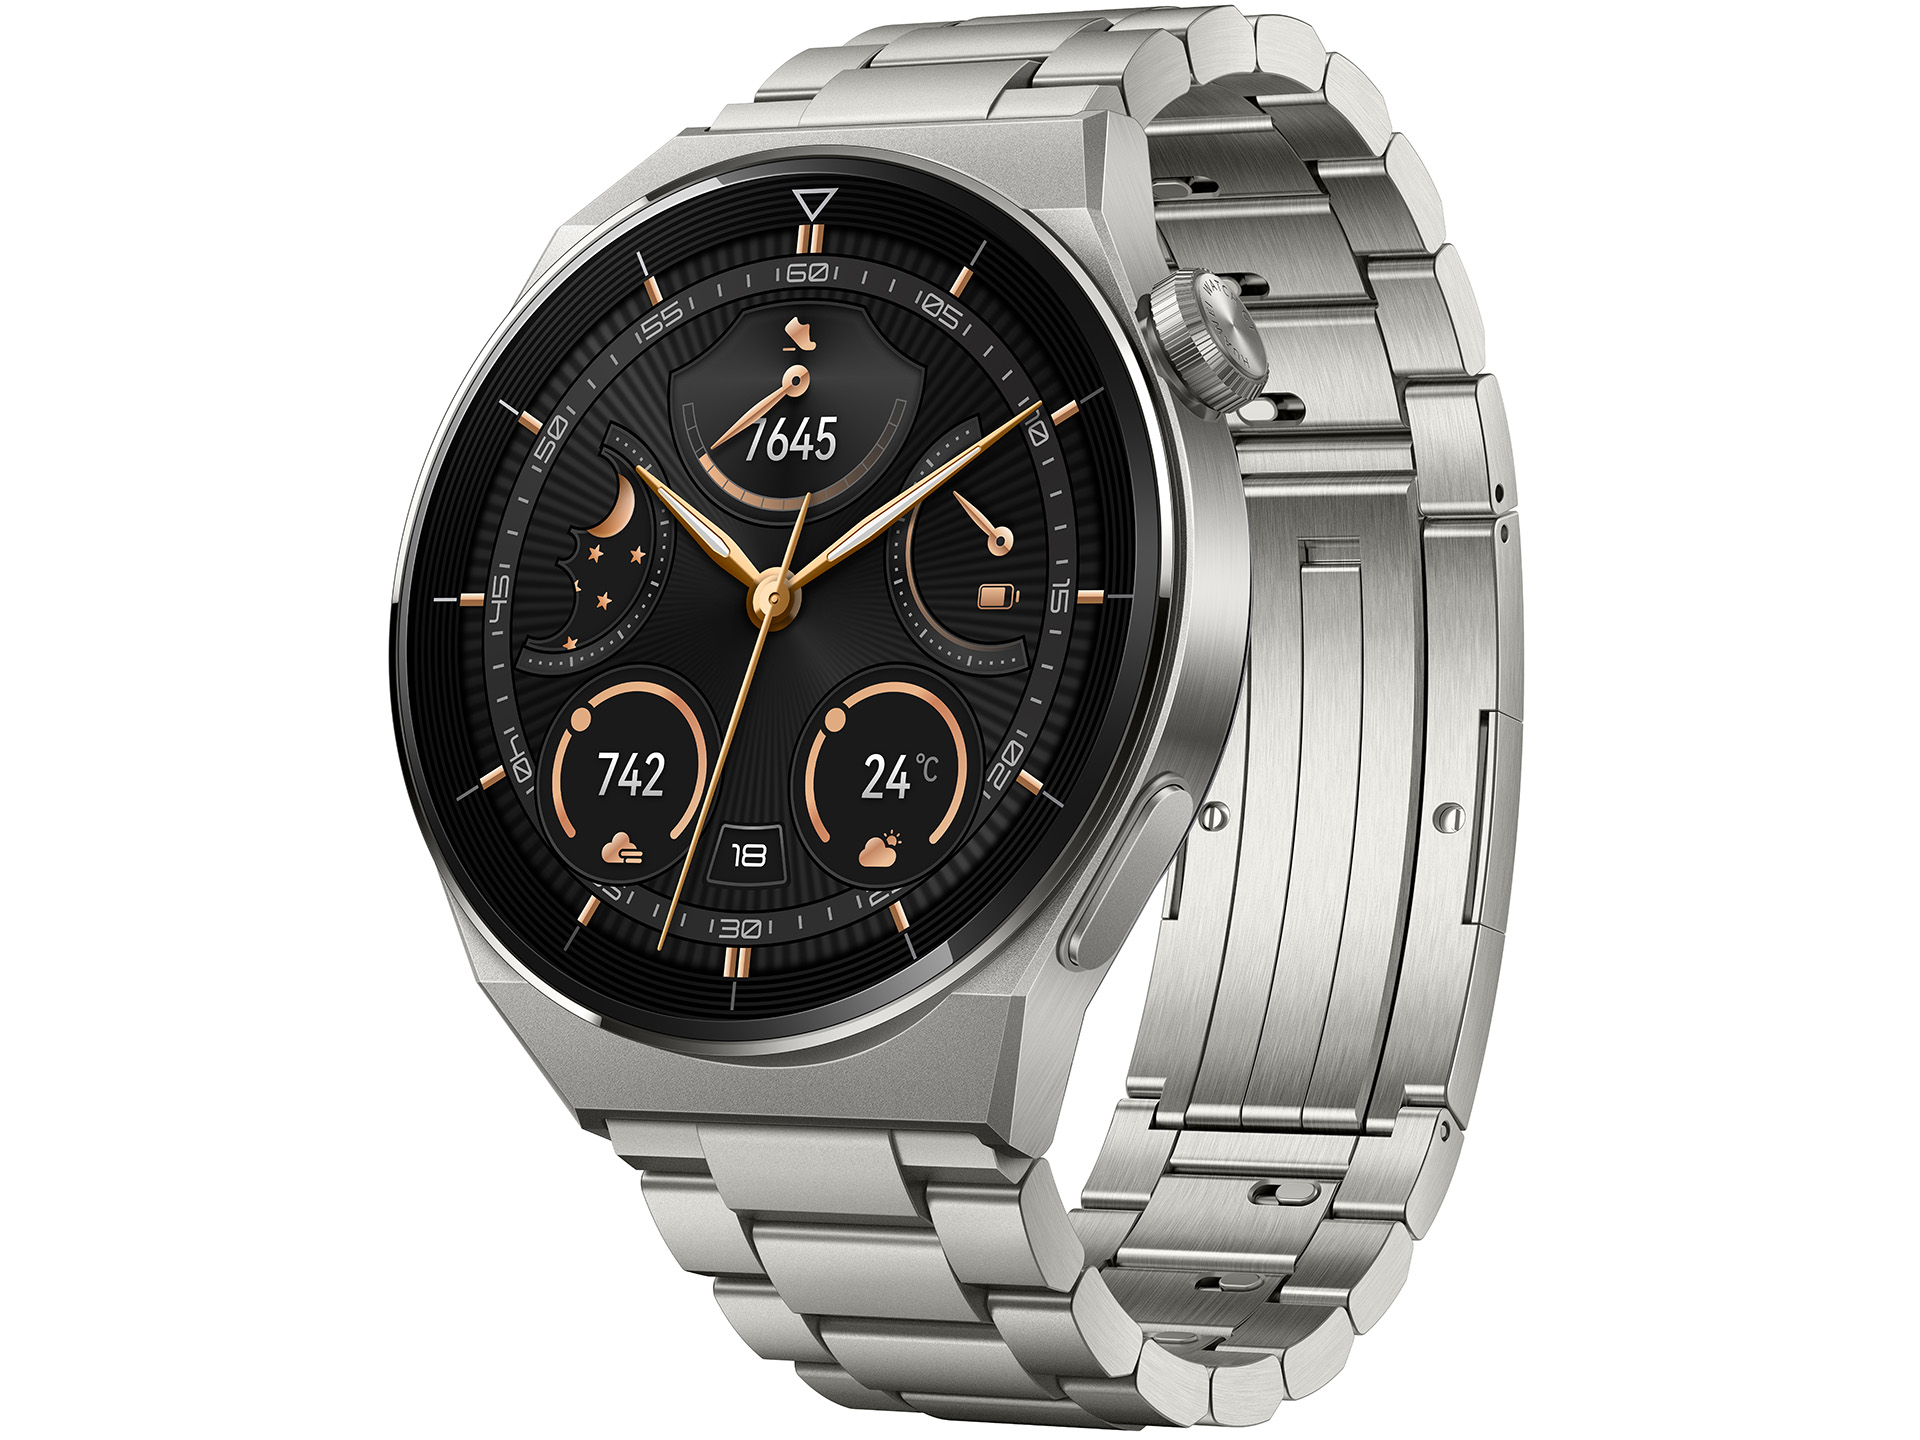 Huawei's new Watch GT3 Pro is a stylish upgrade on the GT 3